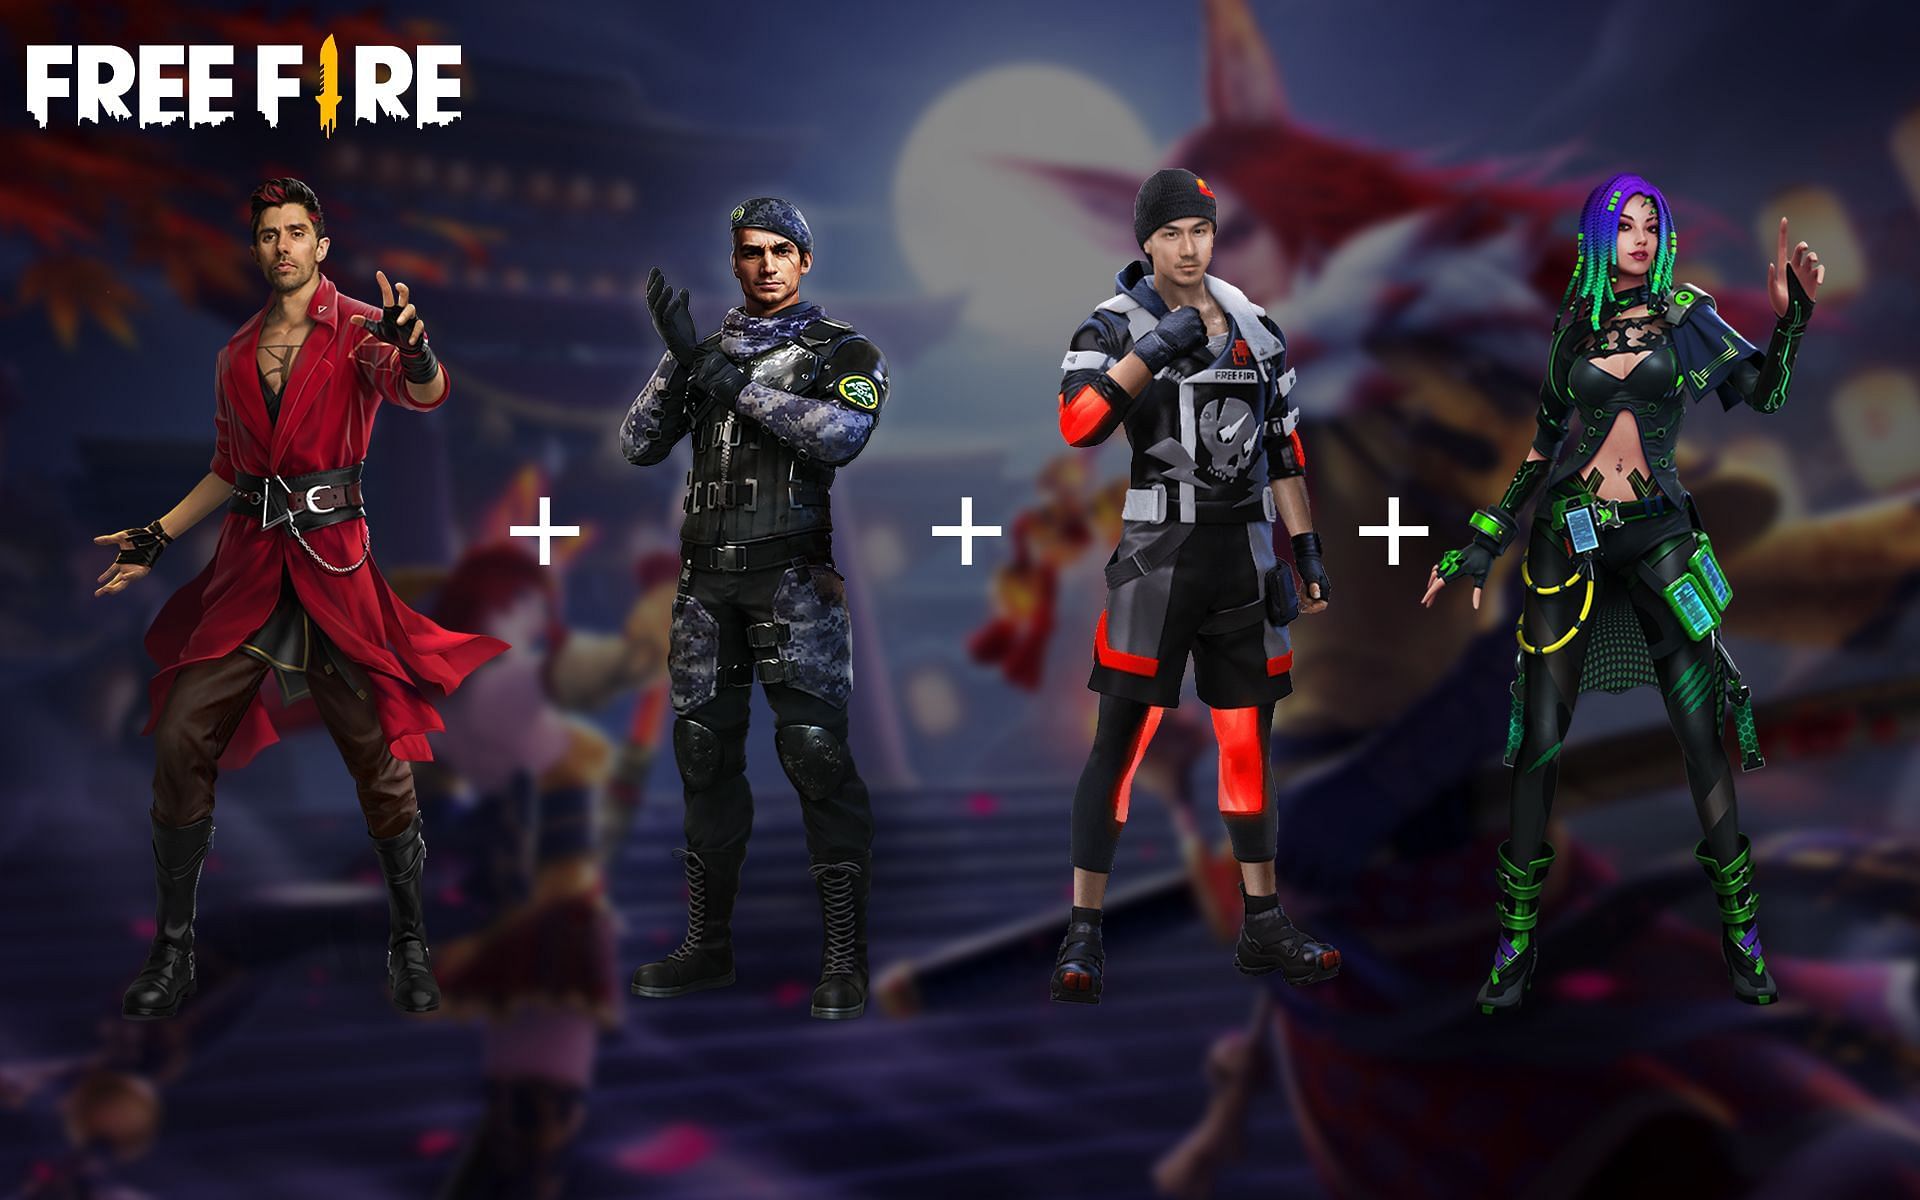 List of the best character combinations that Free Fire players can use (Image via Sportskeeda)